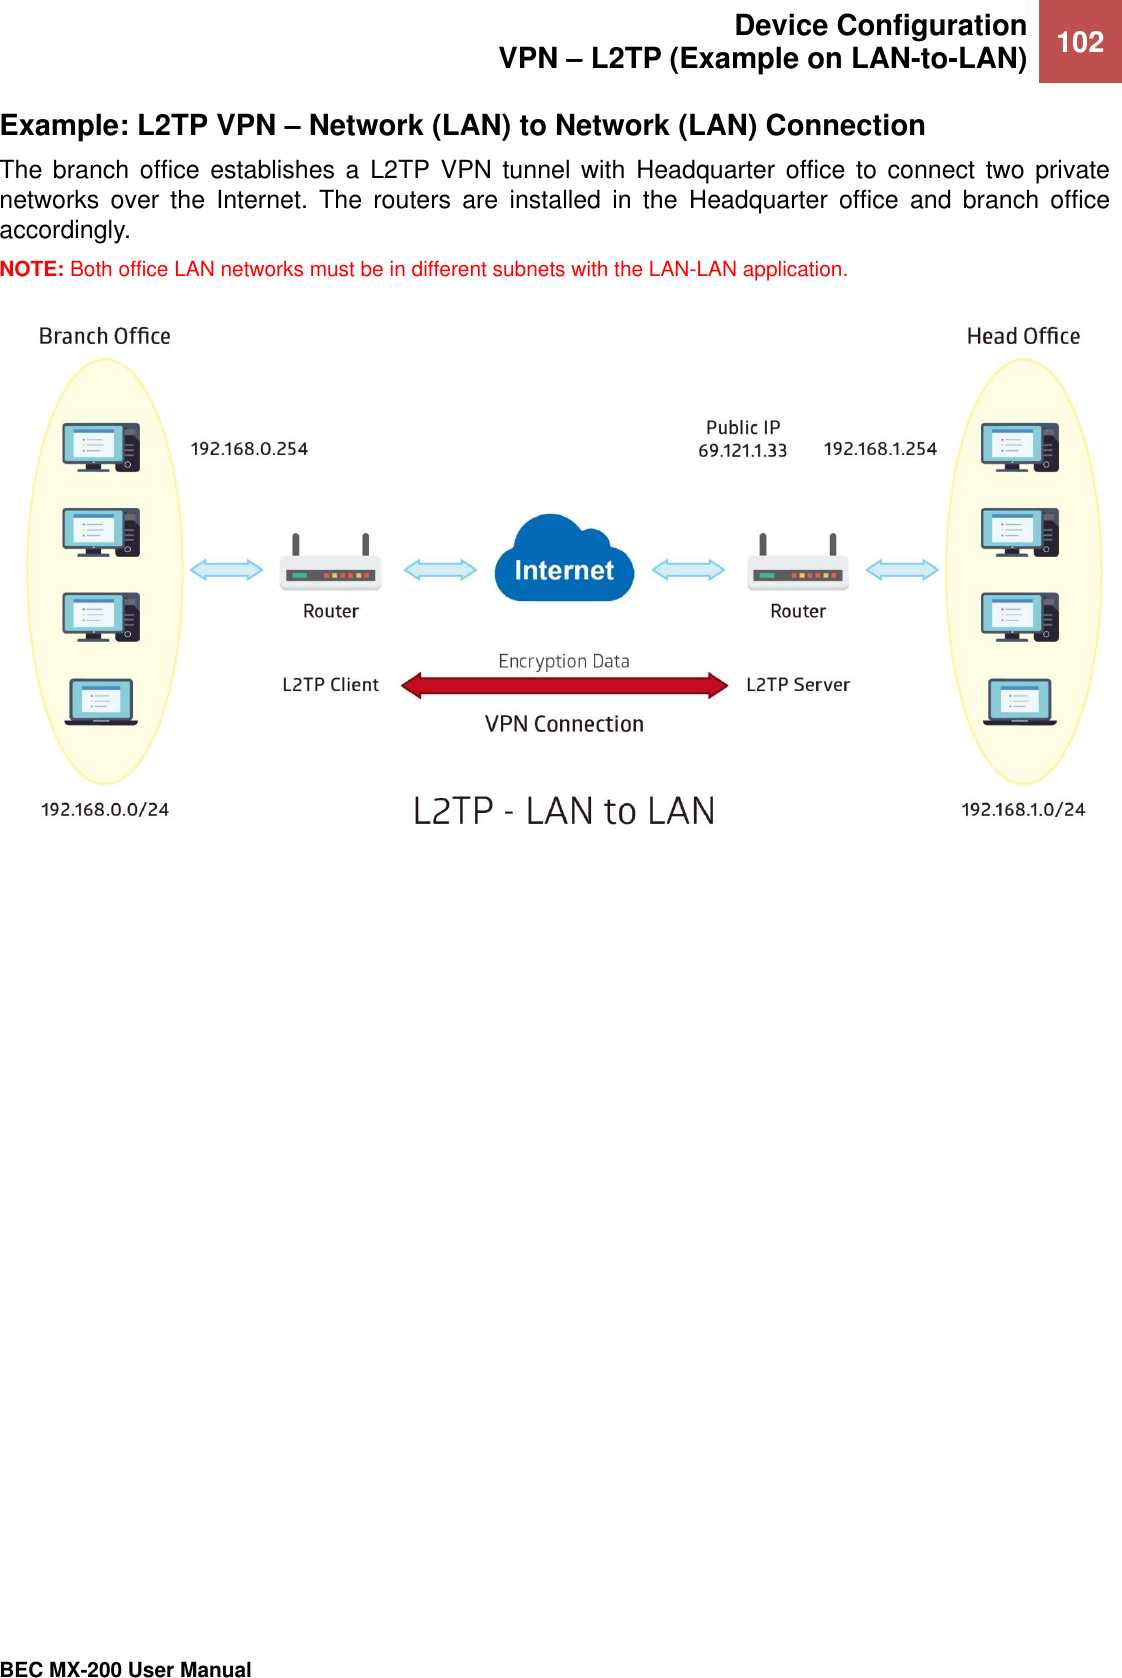  Device Configuration VPN – L2TP (Example on LAN-to-LAN) 102   BEC MX-200 User Manual  Example: L2TP VPN – Network (LAN) to Network (LAN) Connection The branch  office  establishes a L2TP VPN tunnel  with  Headquarter  office  to  connect  two private networks  over  the  Internet. The  routers  are  installed  in  the  Headquarter  office  and  branch  office accordingly. NOTE: Both office LAN networks must be in different subnets with the LAN-LAN application.  